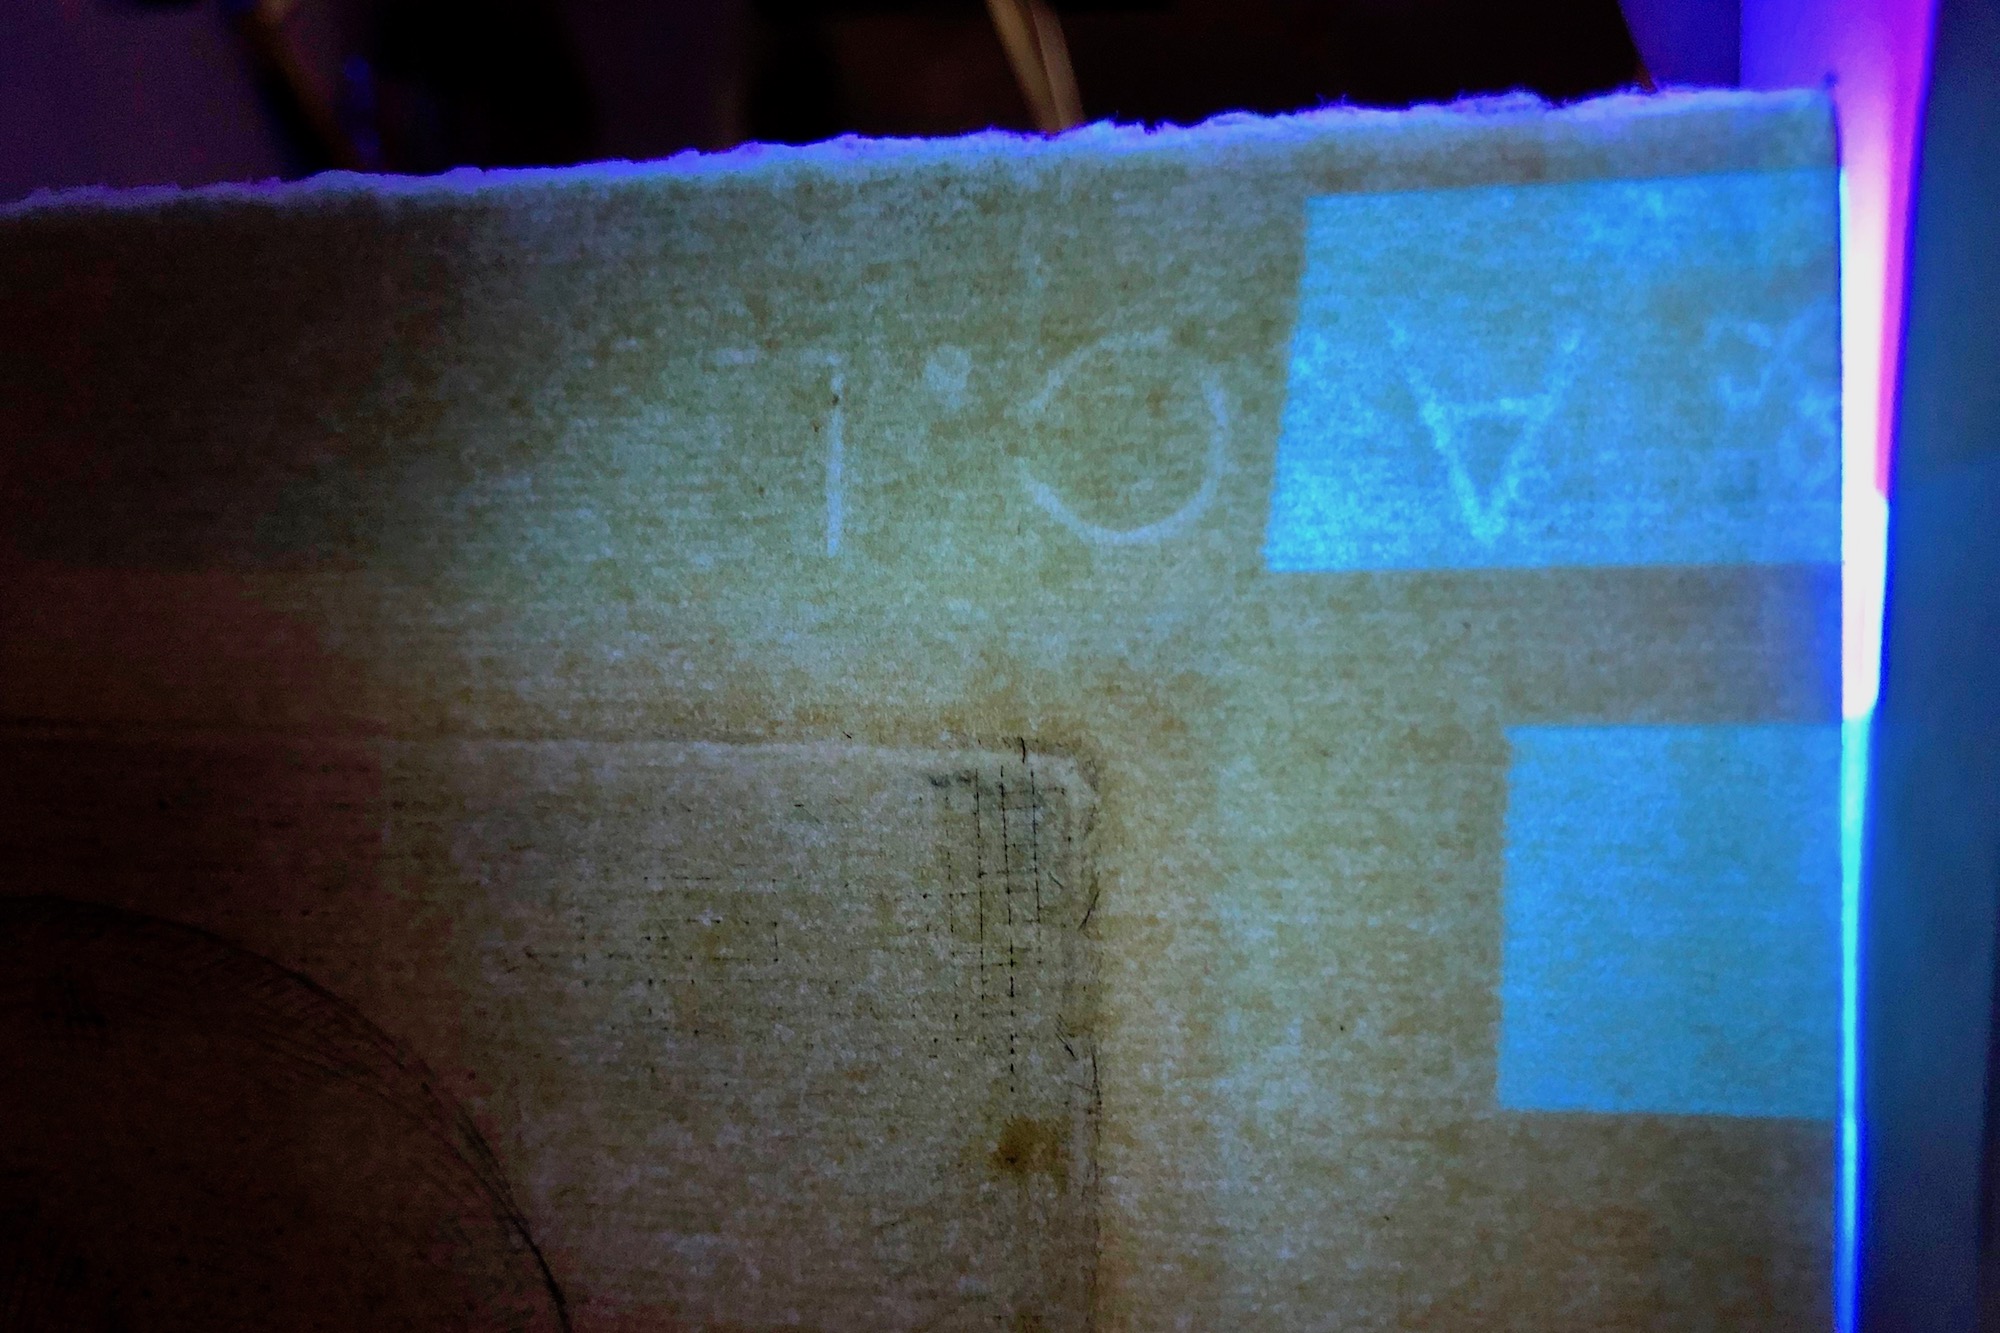 Macon St. Hilaire and Tolleson used ultraviolet light to examine the watermarks of the paper used for the prints.